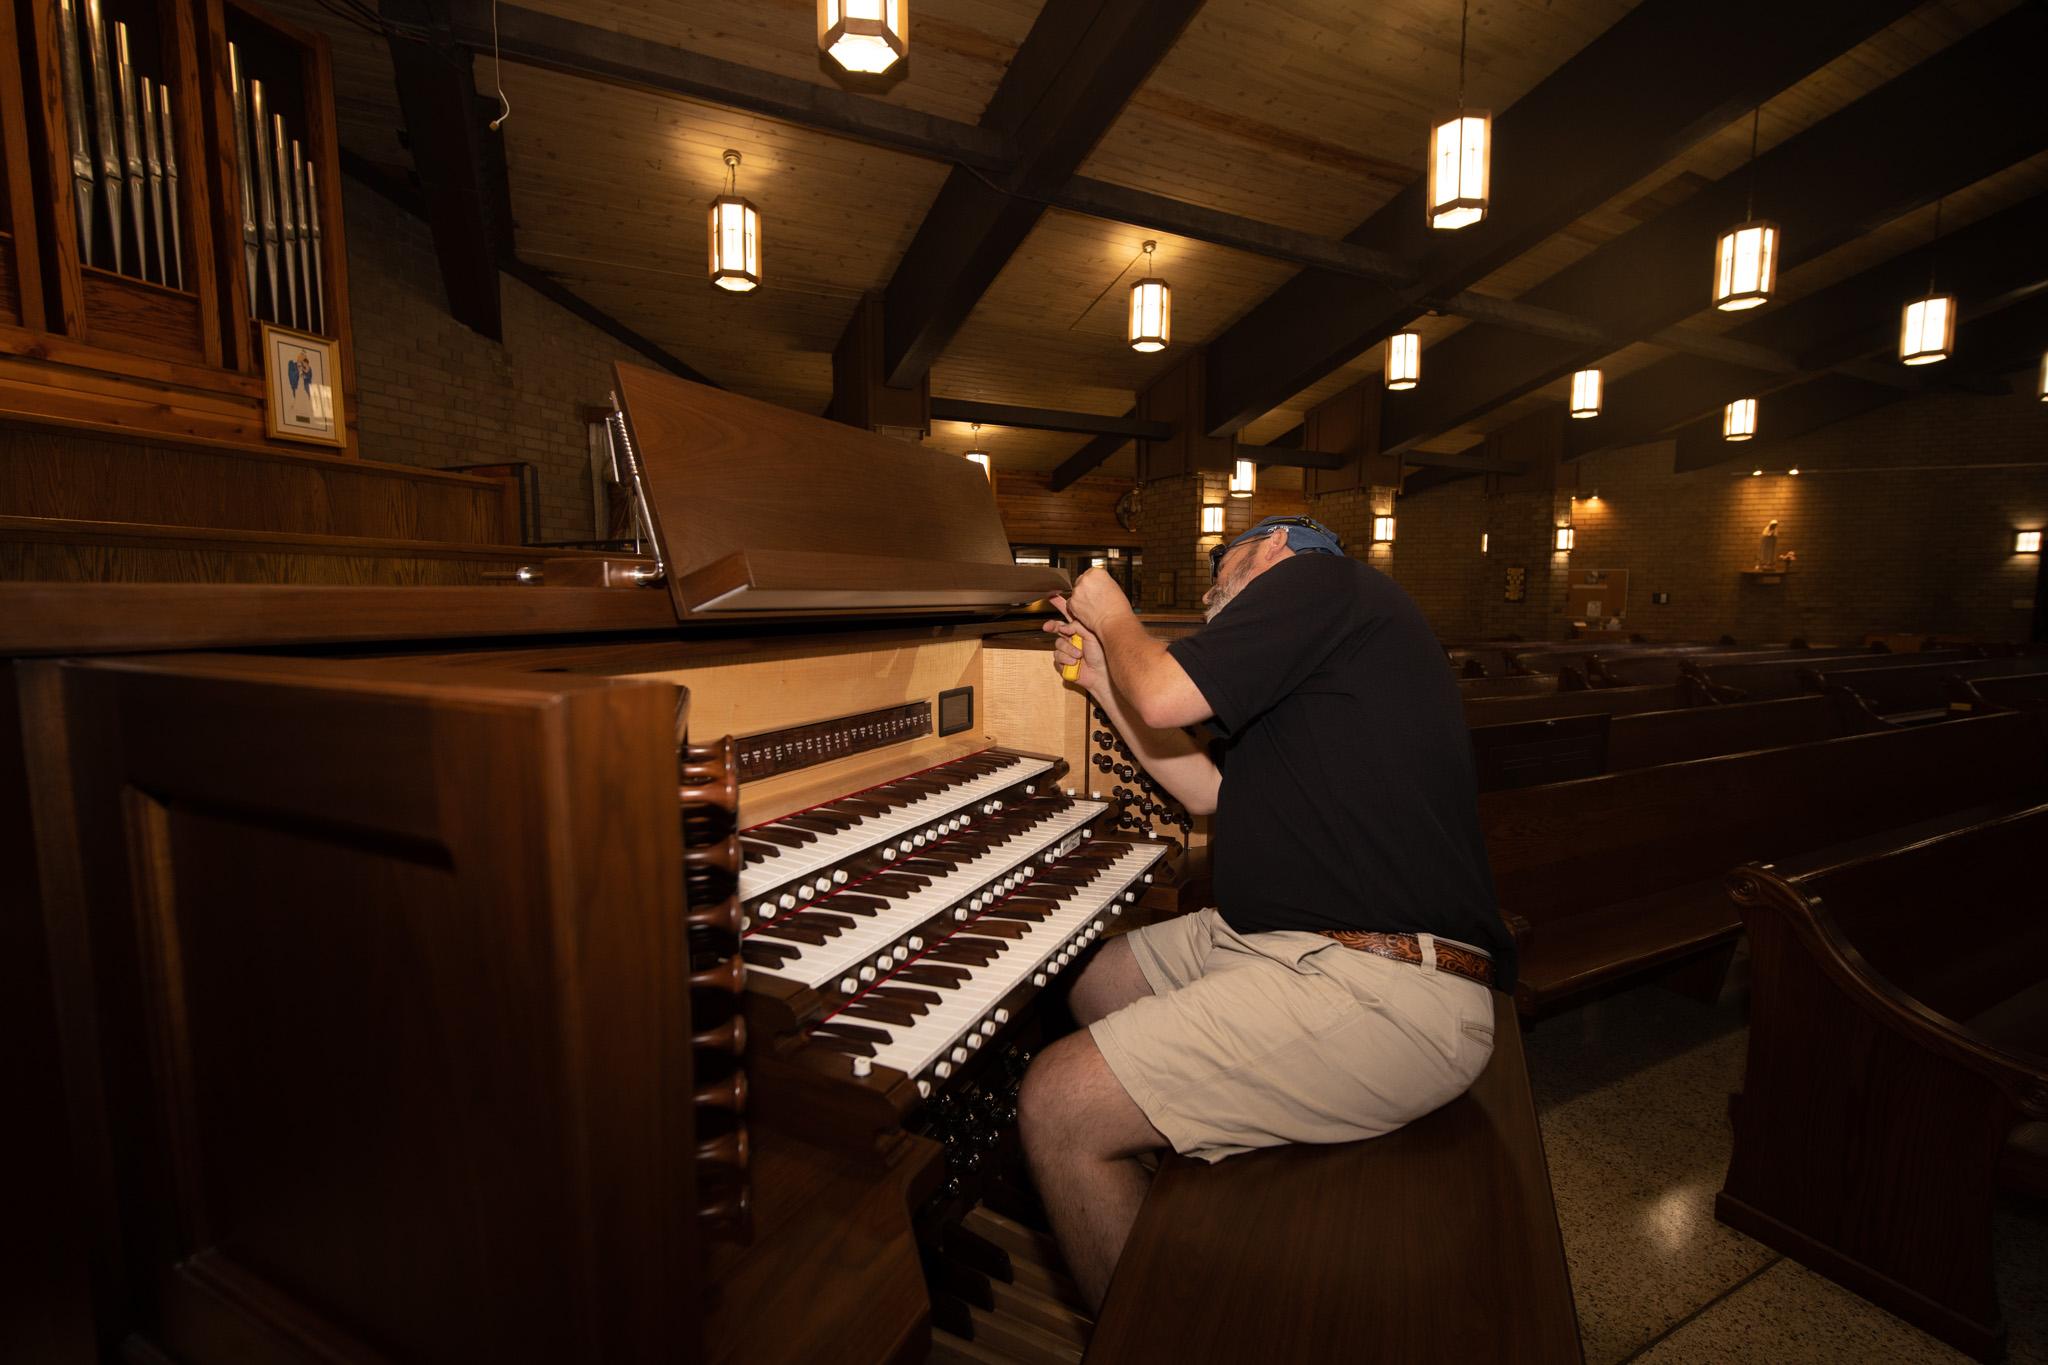 George from Fox installing the additional parts of the organ